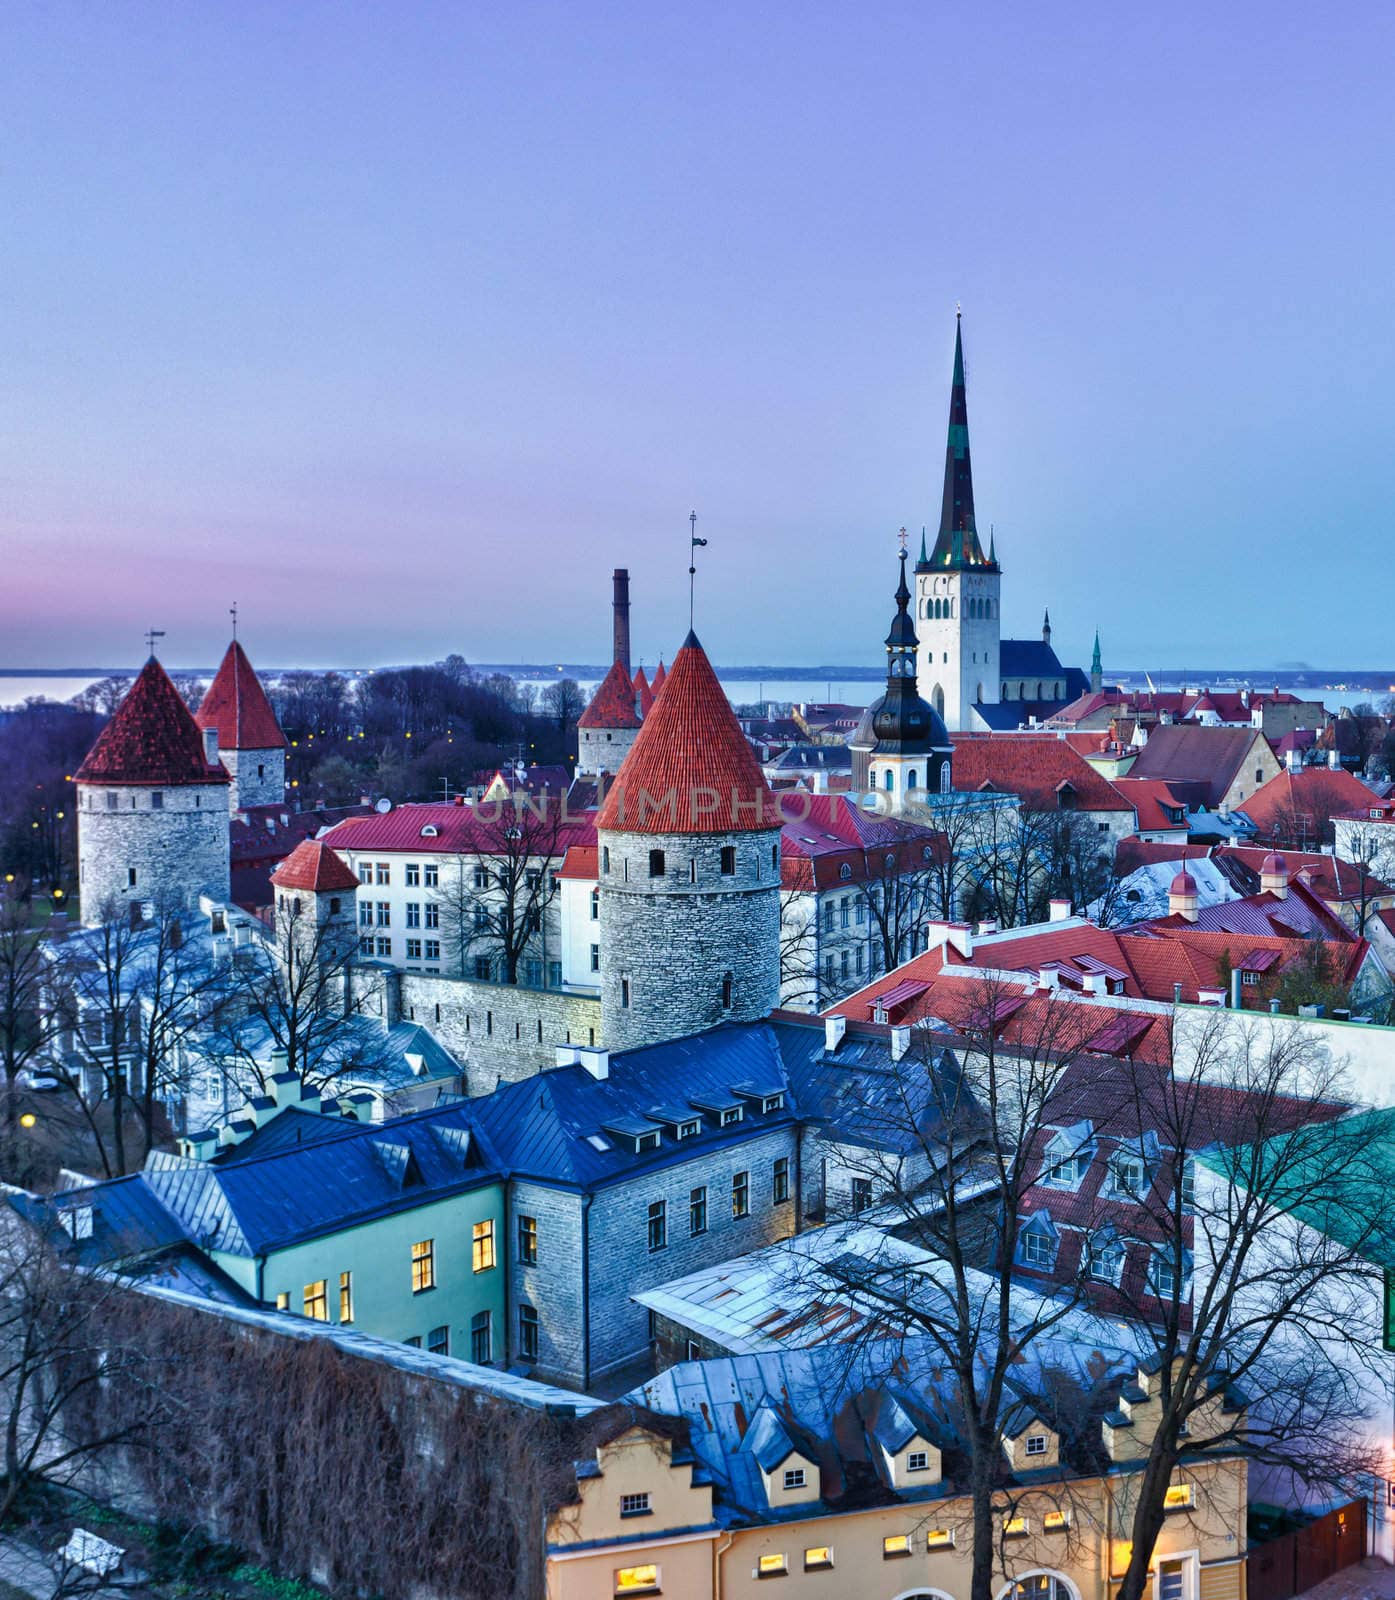 Capital of Estonia, Tallinn is famous for its World Heritage old town walls and cobbled streets. The old town is surrounded by stone walls and distinctive red roofs and glows at dusk